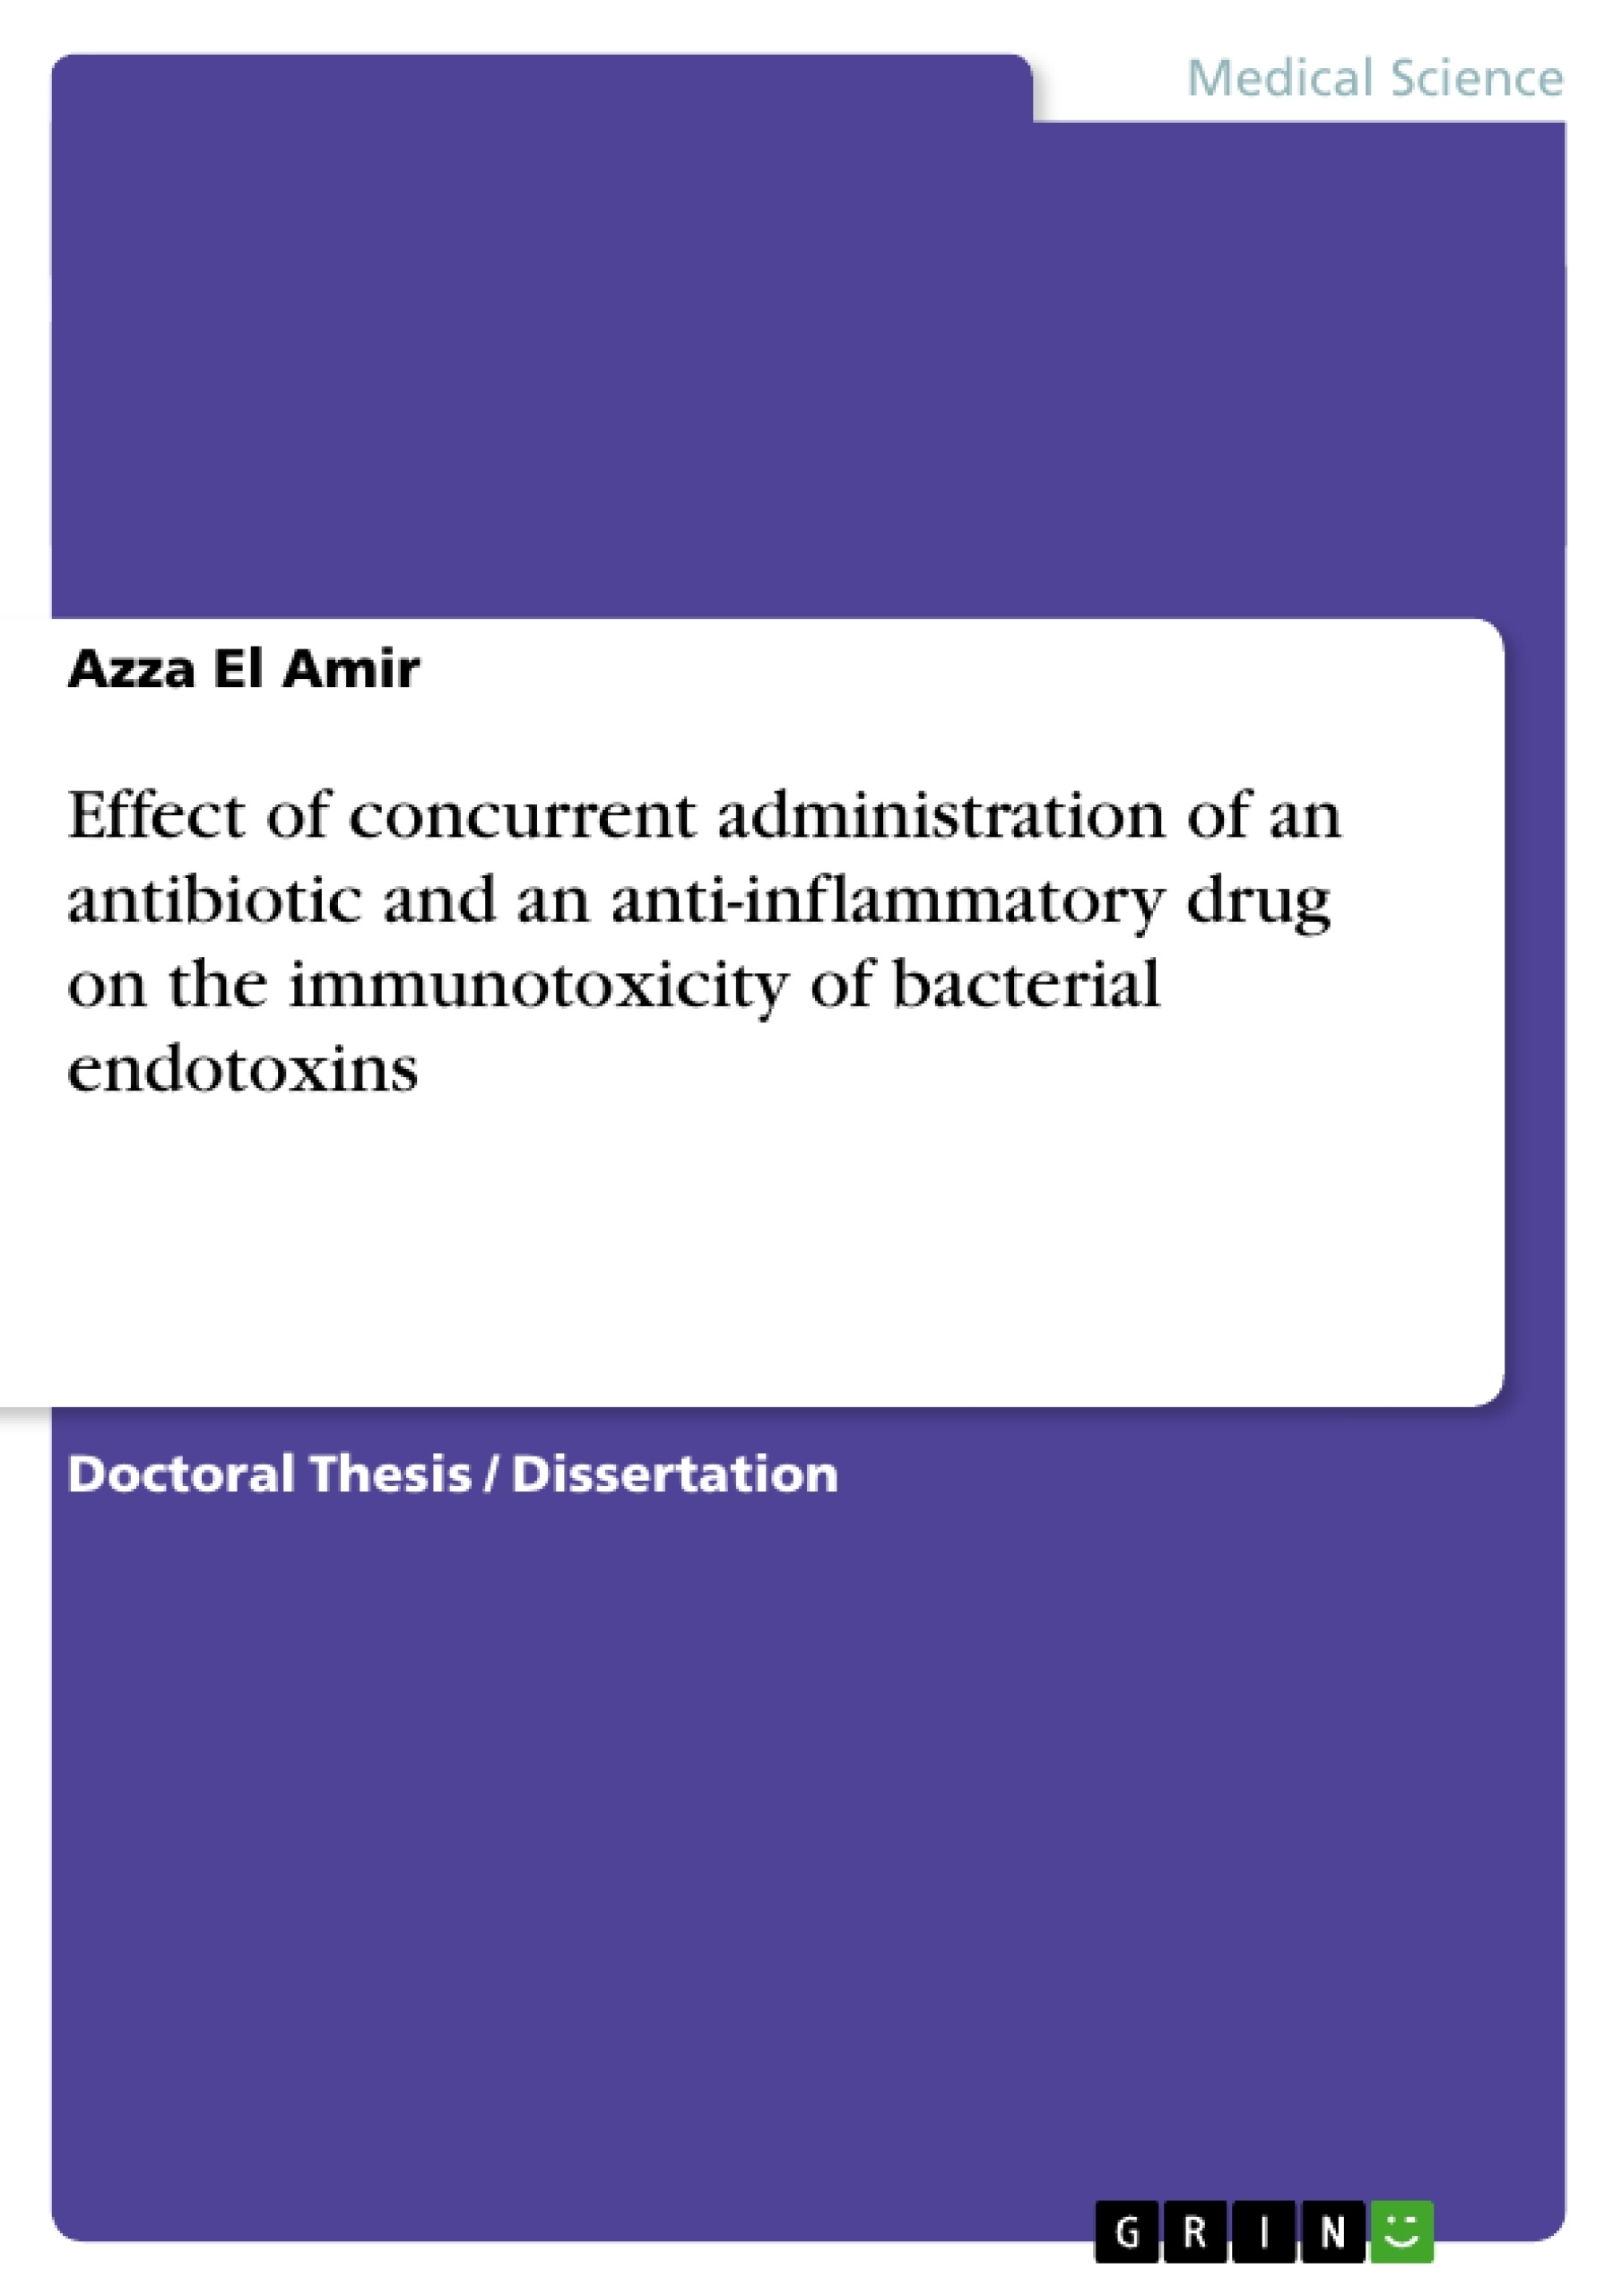 Título: Effect of concurrent administration of an antibiotic and an anti-inflammatory drug on the immunotoxicity of bacterial endotoxins